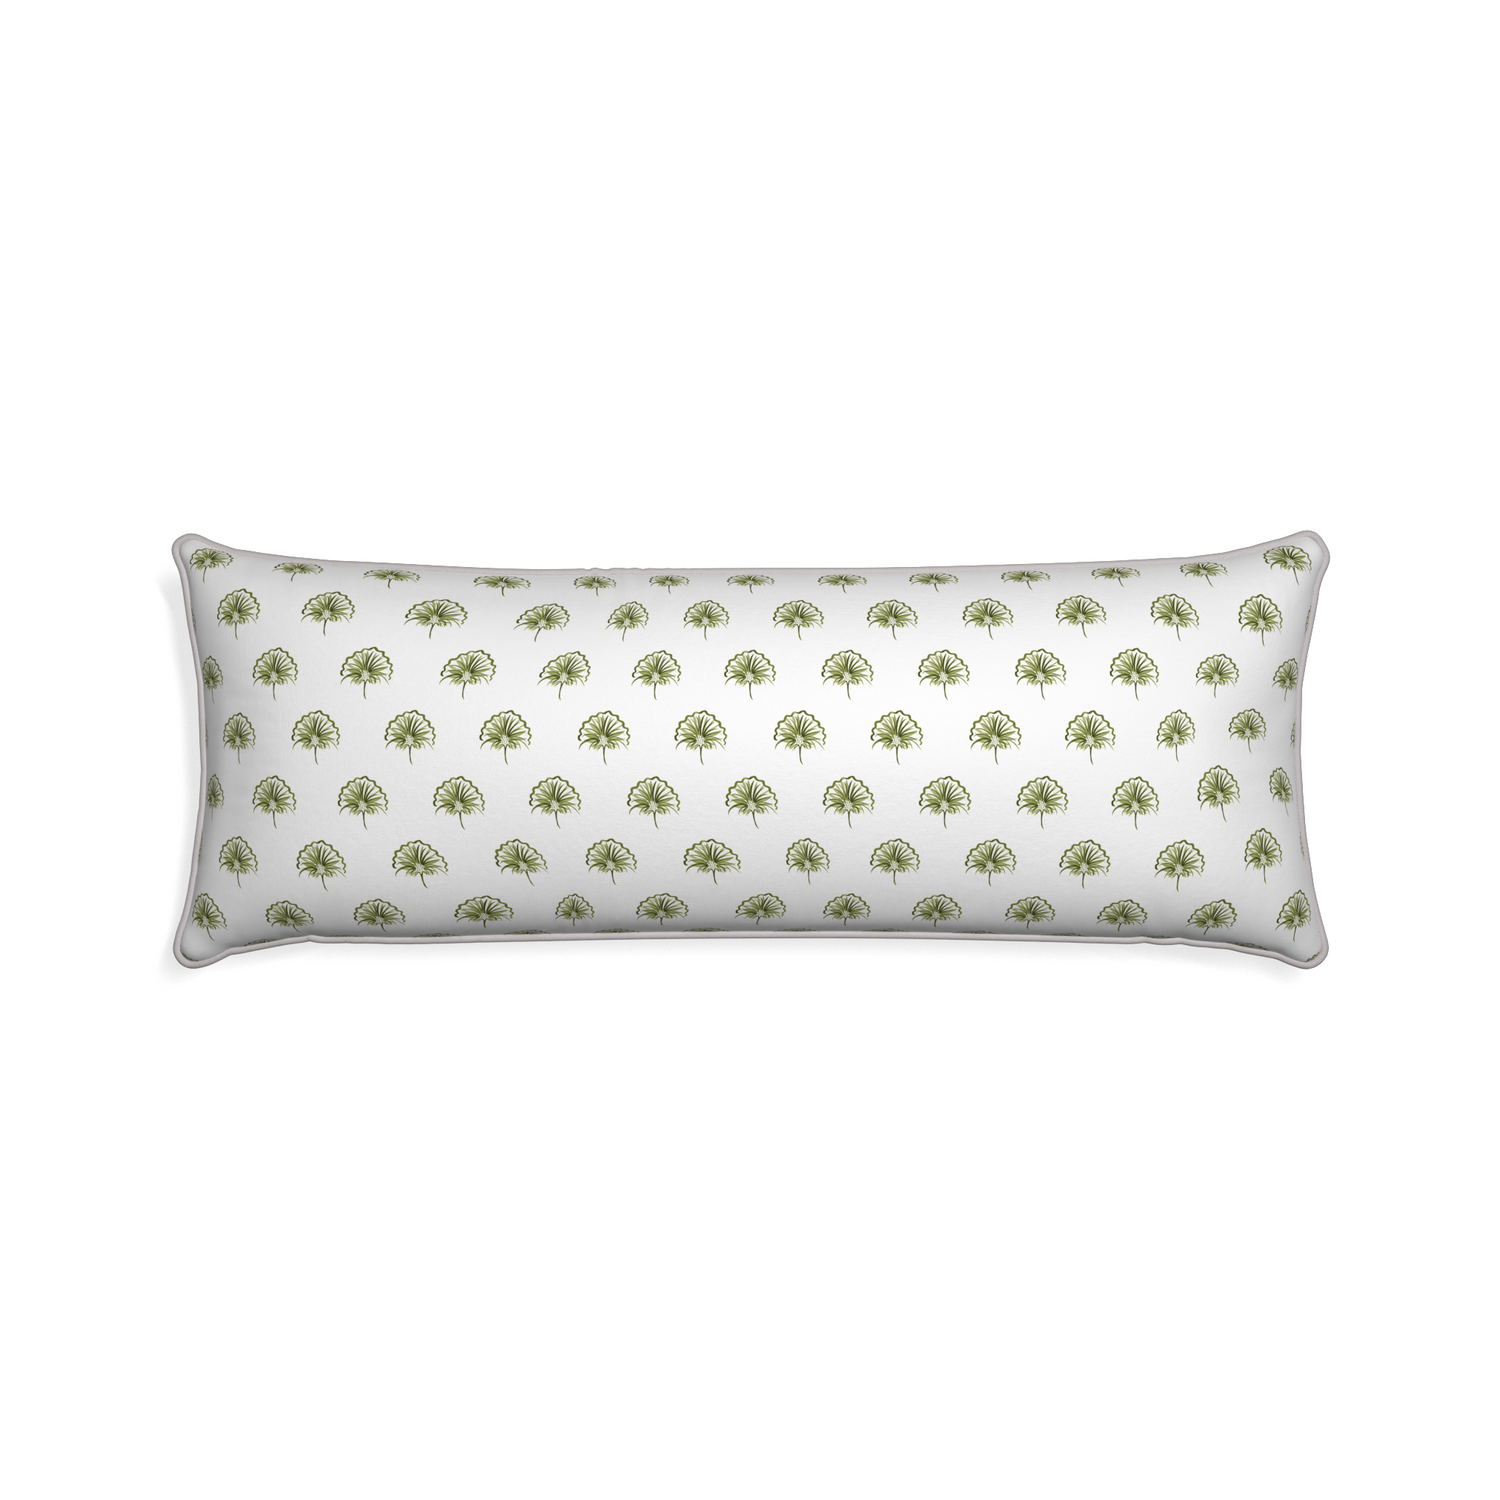 Xl-lumbar penelope moss custom green floralpillow with pebble piping on white background